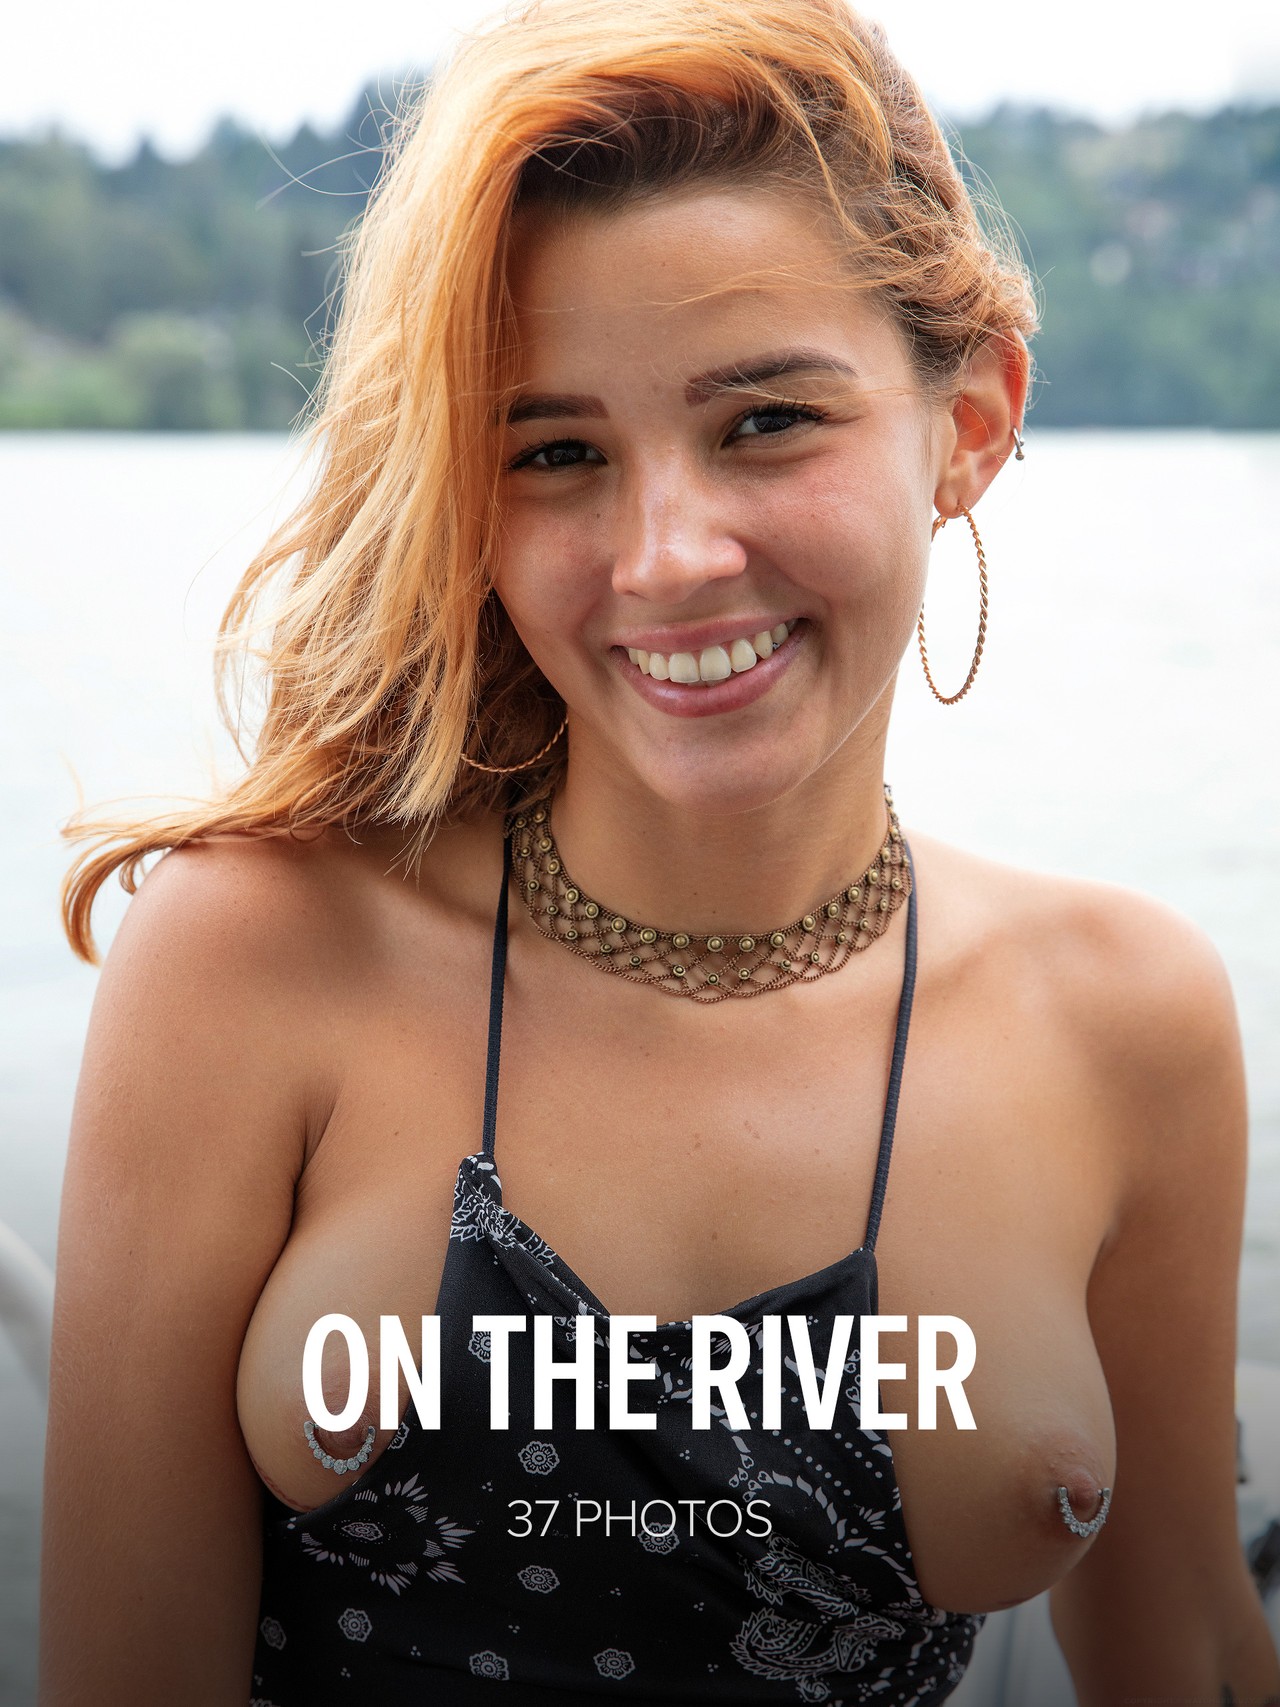 Now you have seen the video, check out in detail how our super sexy Agatha Vega teases and plays half naked on the boat. She loves being seen by all and on a public lake this is just perfect for her. We love her naughtiness, sure you will too.